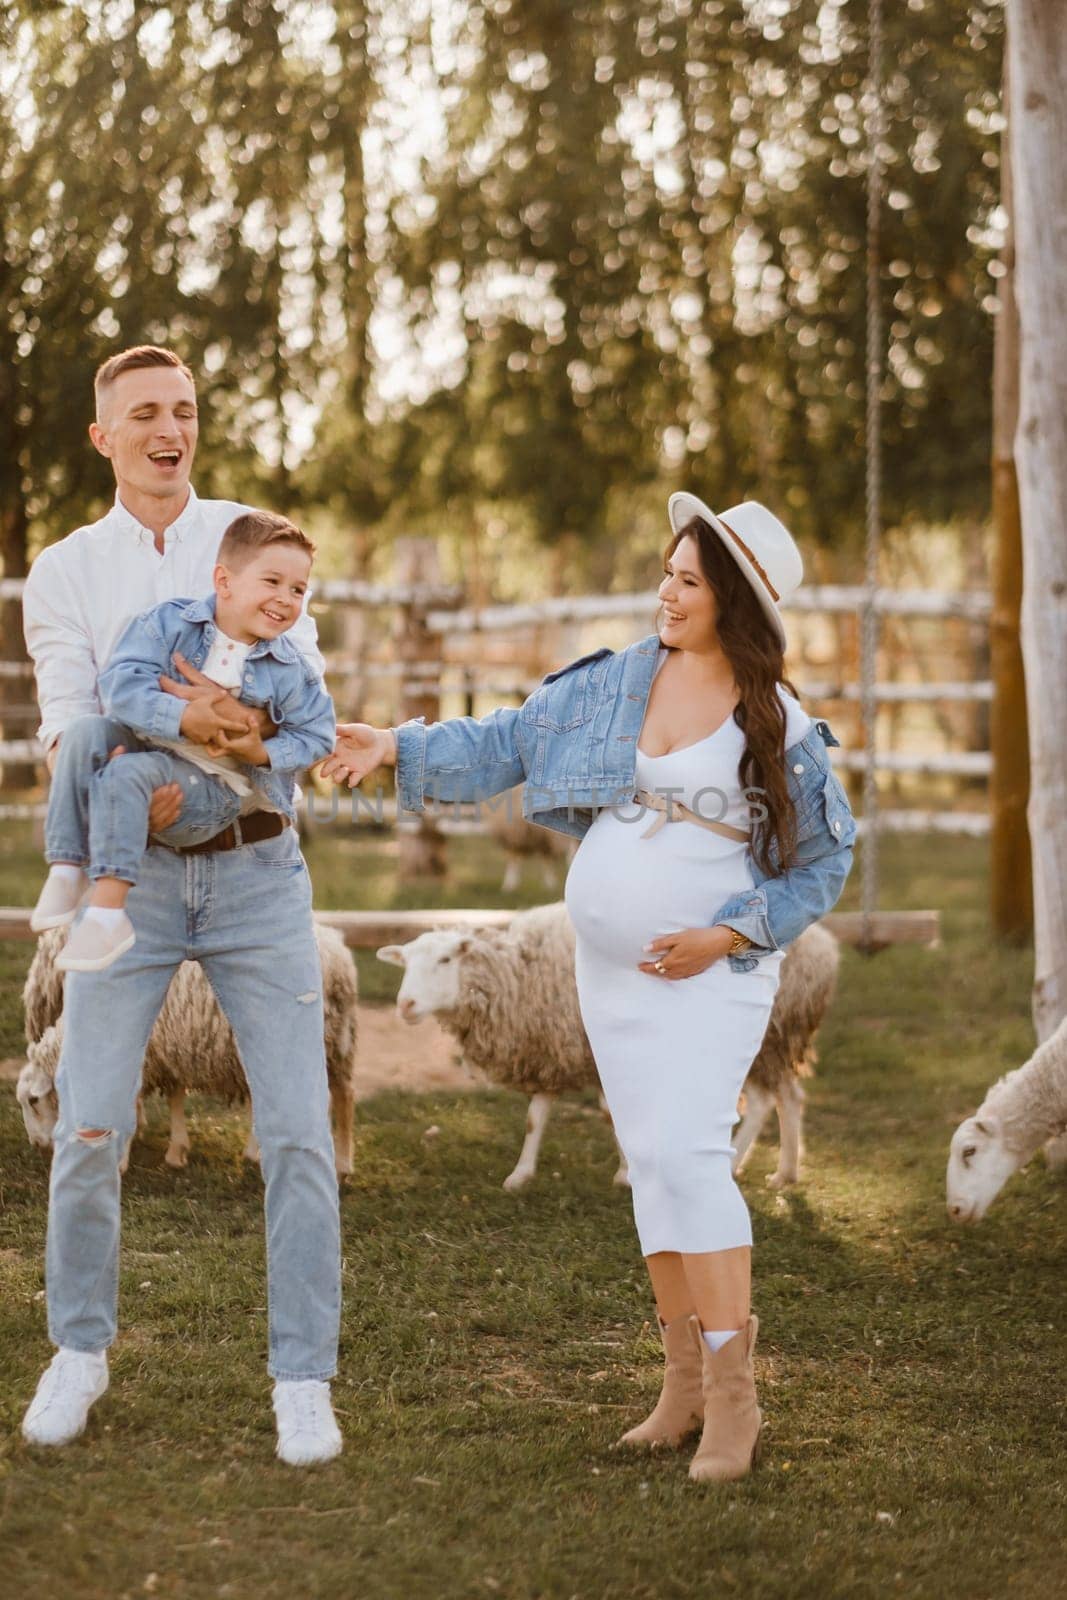 Stylish family in summer on a village farm with sheep by Lobachad